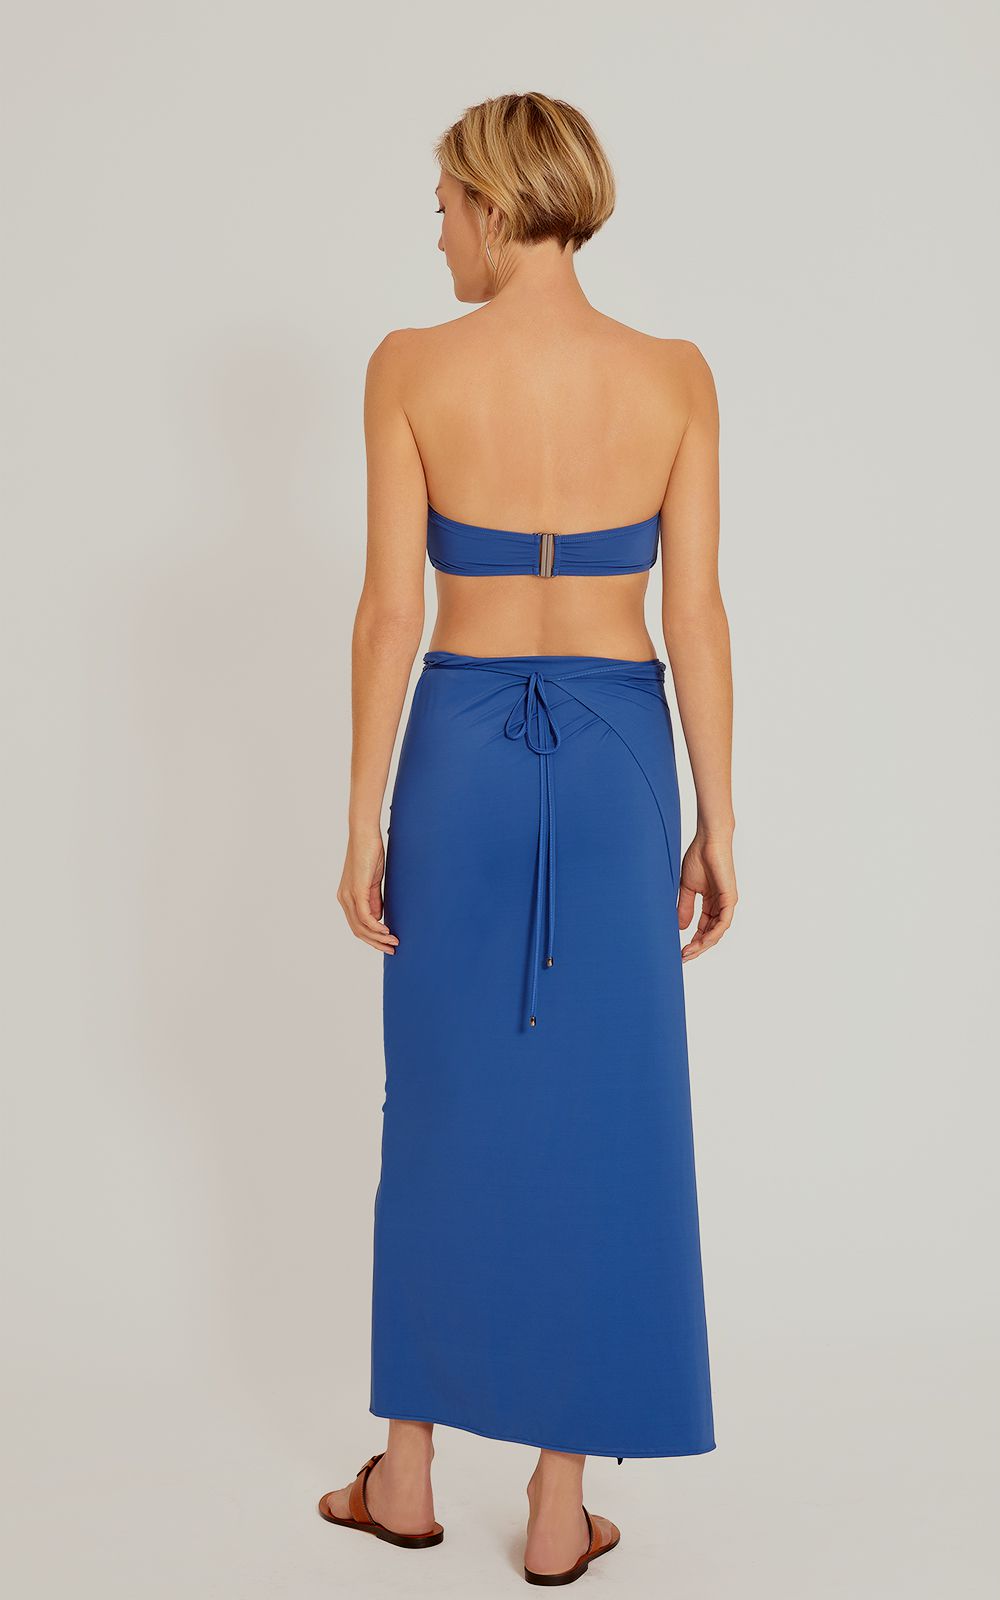 Lenny Niemeyer Knot Touch Sarong in Cobalt -Wear Multiple Ways